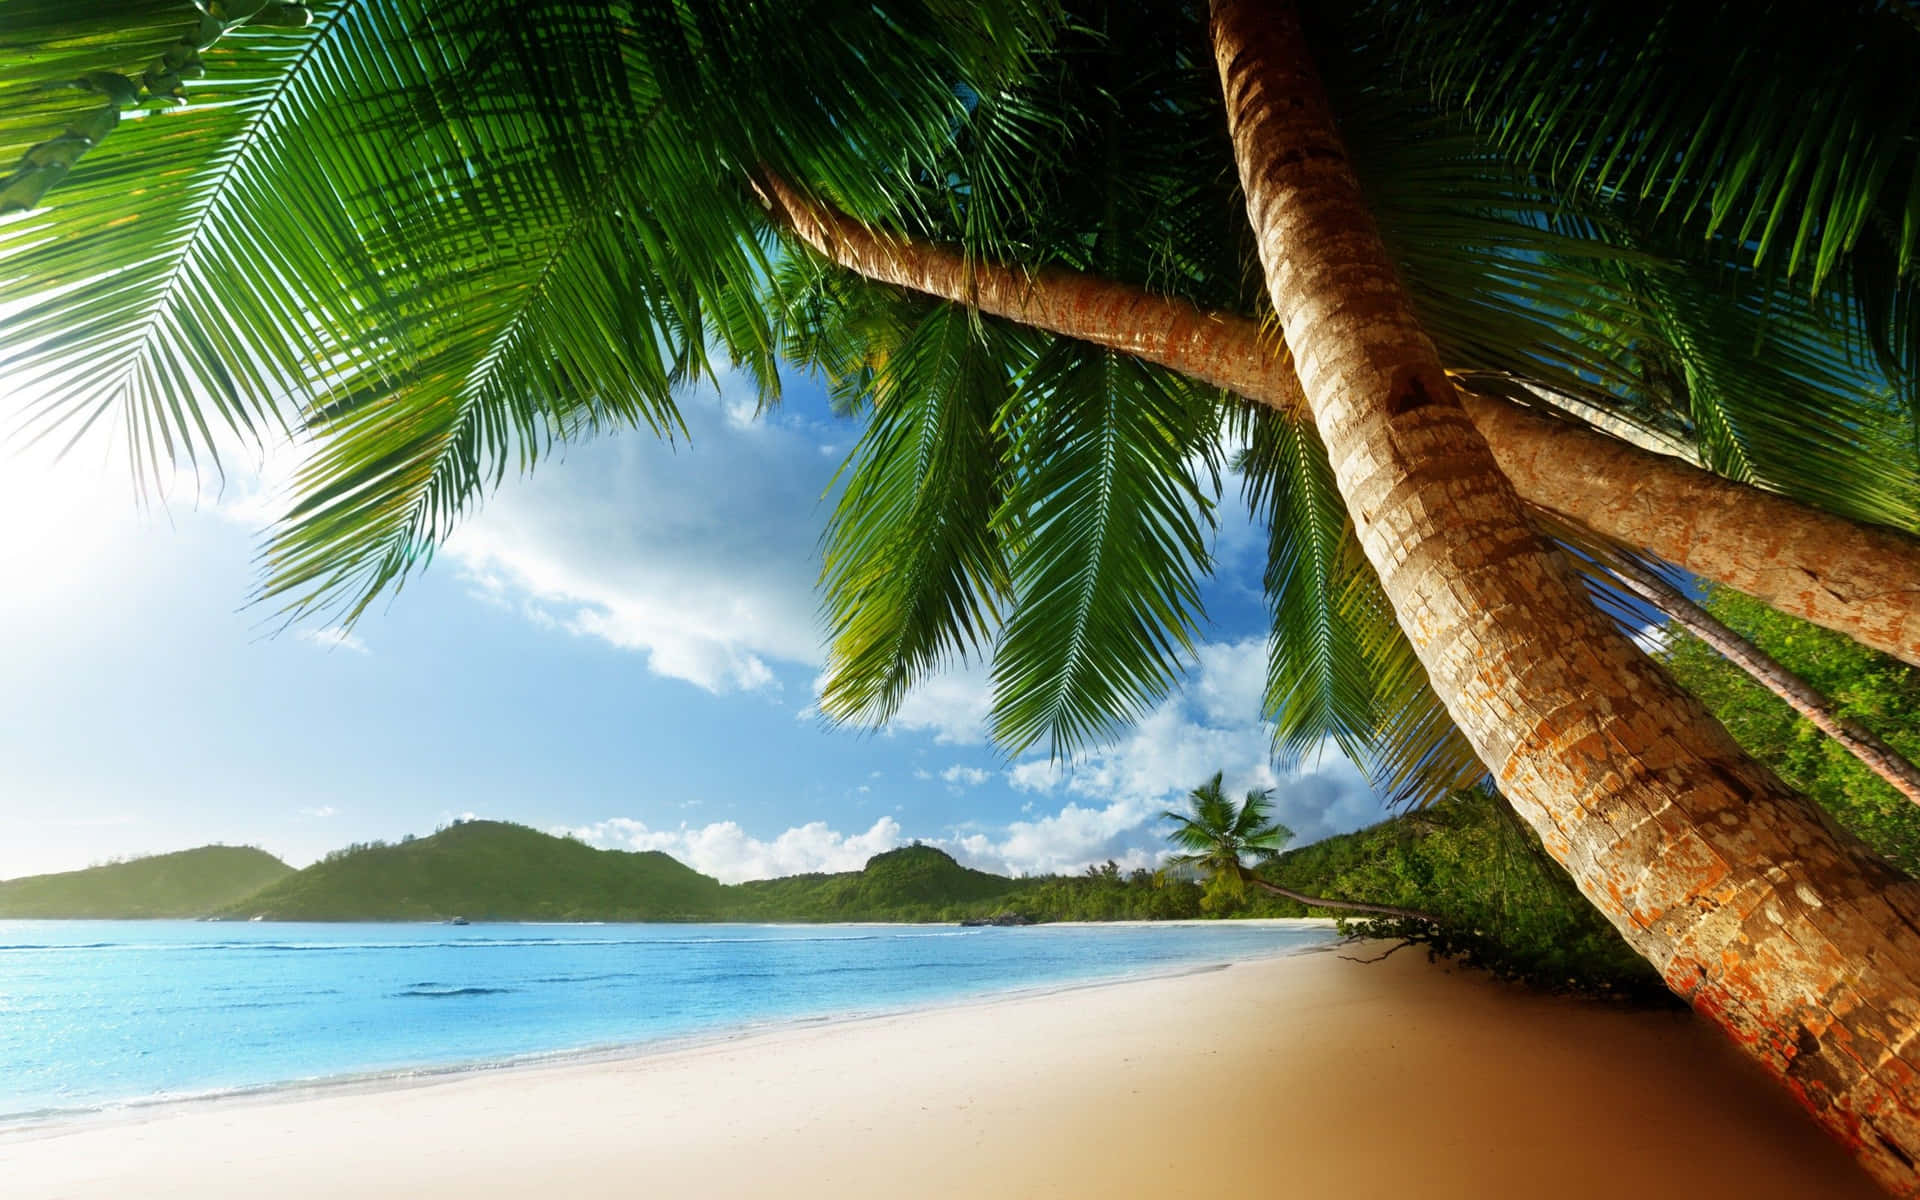 Take some time to relax and enjoy the breathtaking view of a white sand beach with towering palm trees. Wallpaper